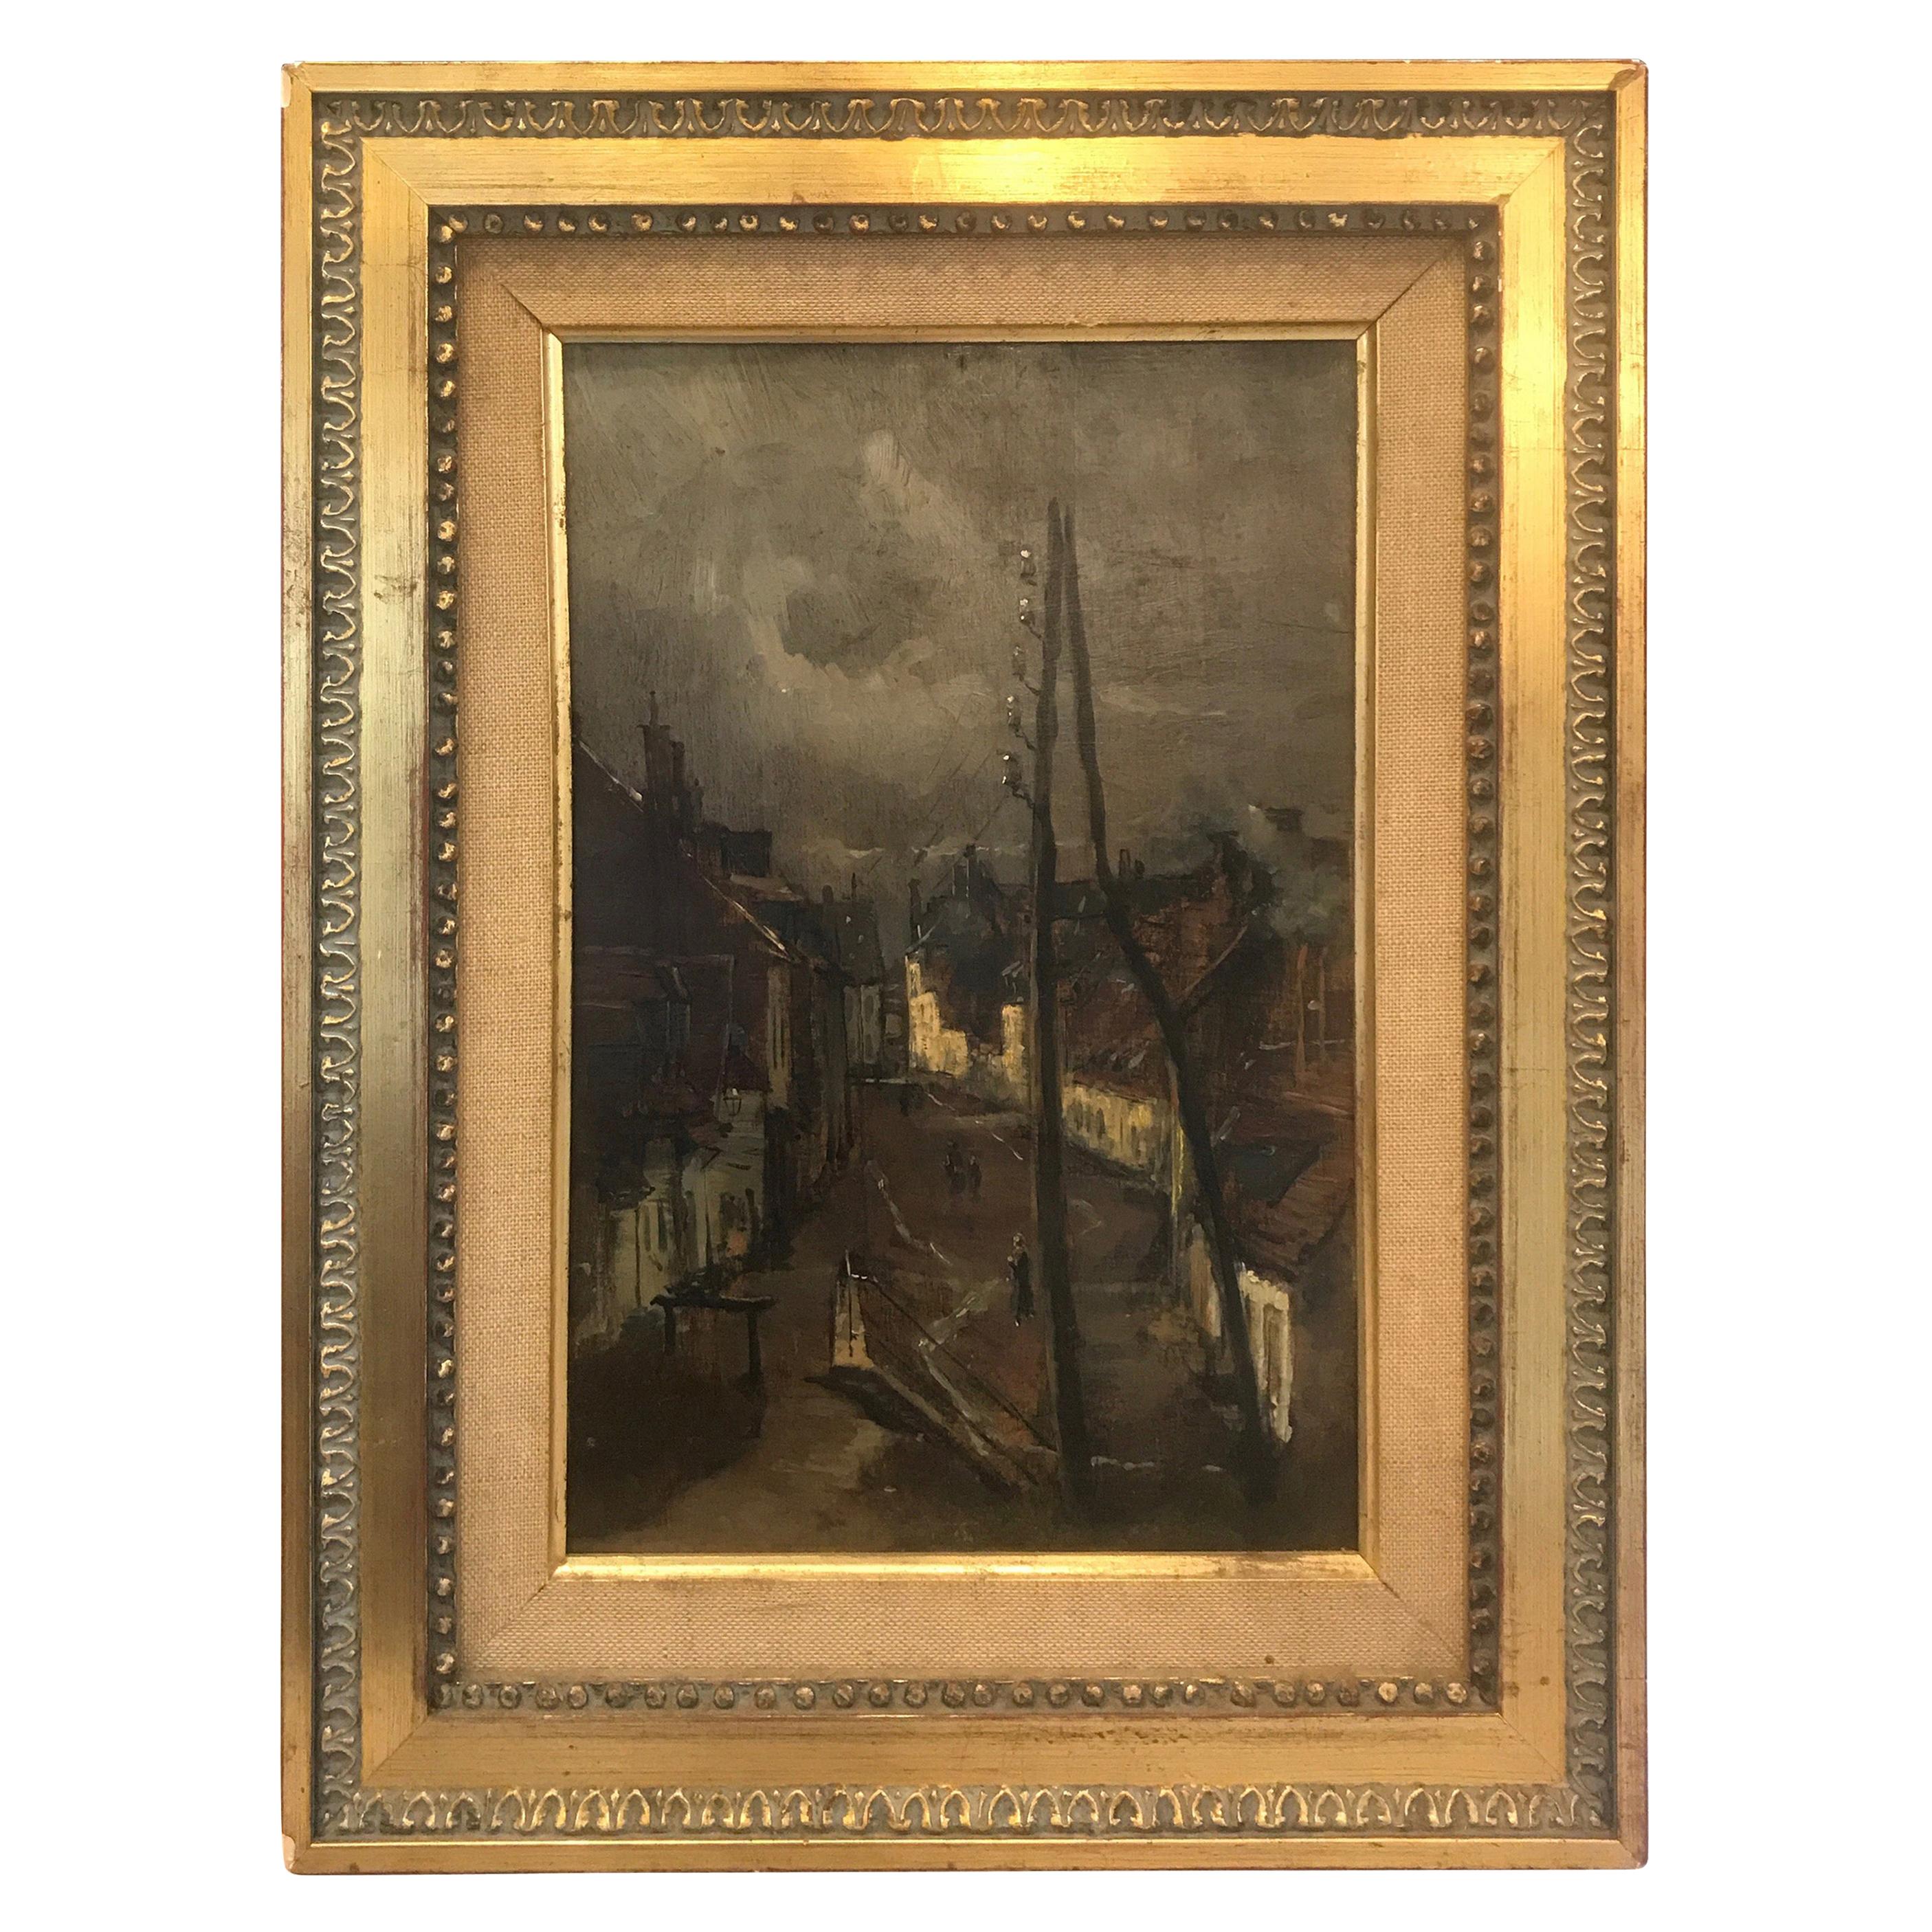 Late 19th Century French Impressionist Painting Oil on Board by Auguste Boulard